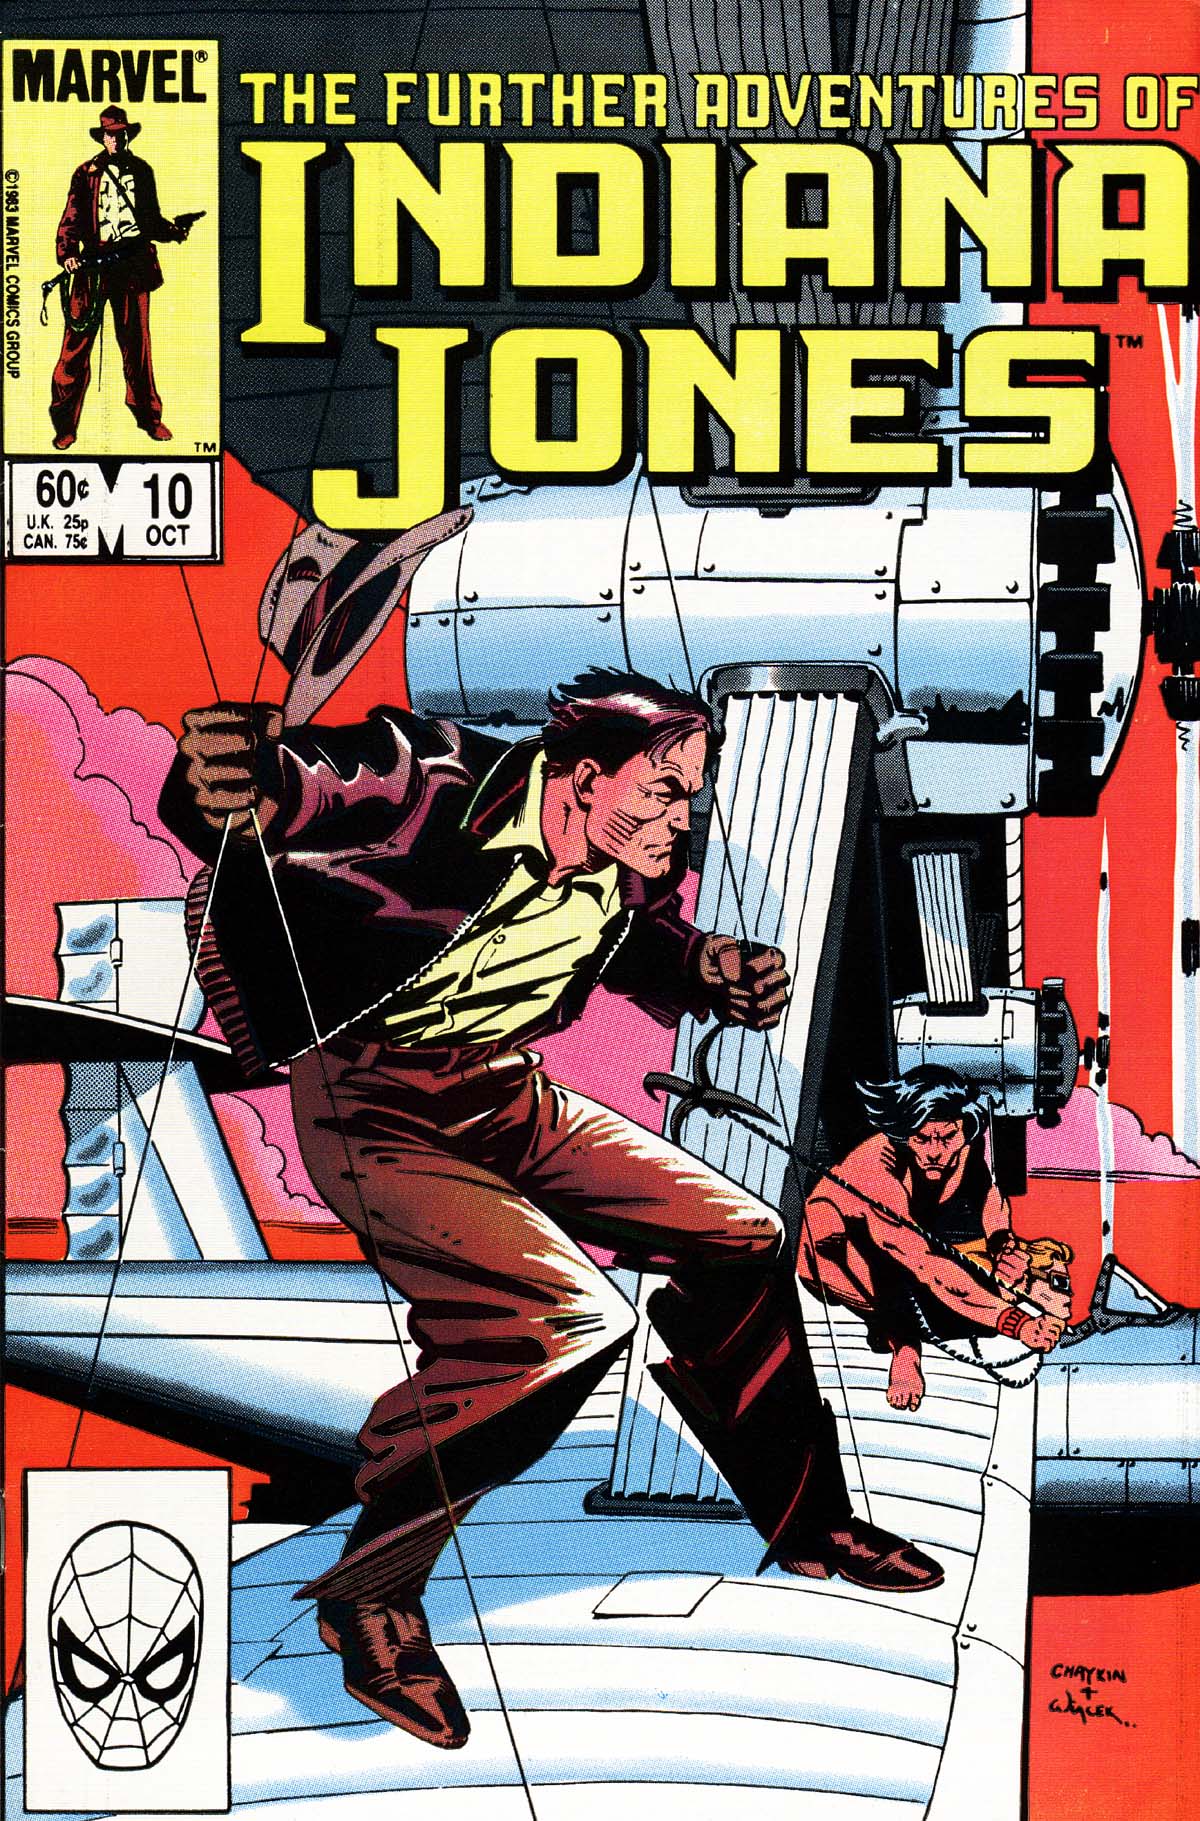 Read online The Further Adventures of Indiana Jones comic -  Issue #10 - 1